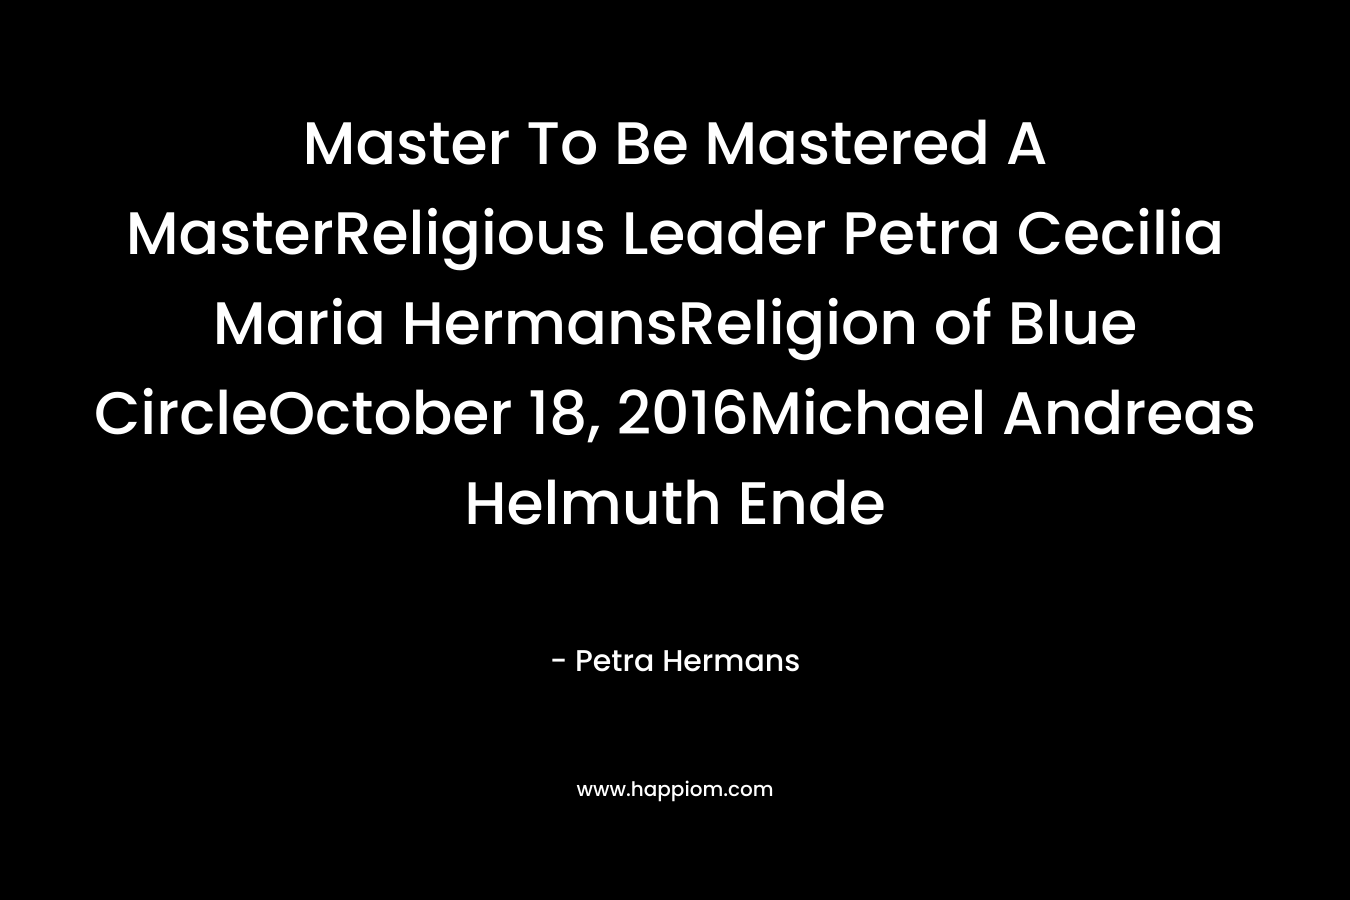 Master To Be Mastered A MasterReligious Leader Petra Cecilia Maria HermansReligion of Blue CircleOctober 18, 2016Michael Andreas Helmuth Ende – Petra Hermans